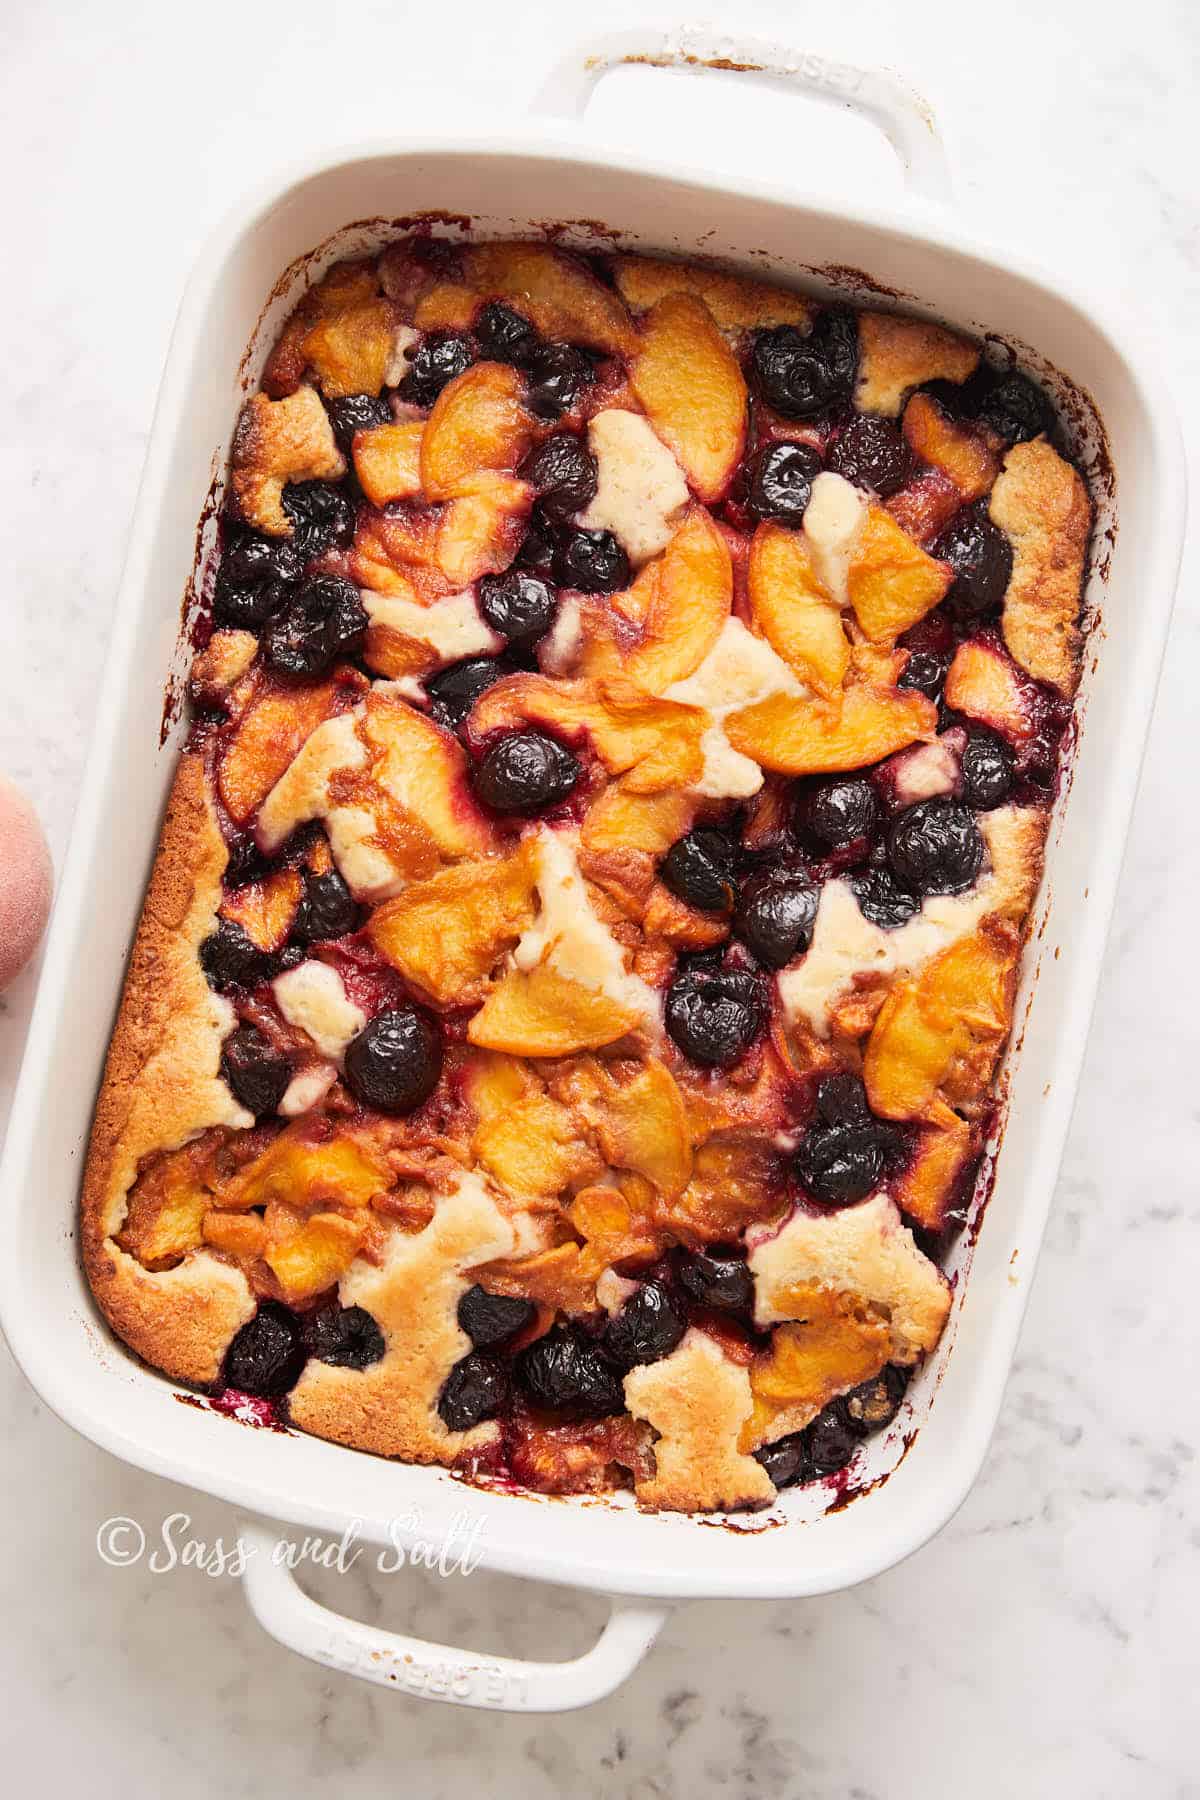 A freshly baked fruit cobbler in a white baking dish, featuring golden-brown crust with vibrant peaches and dark cherries visible.